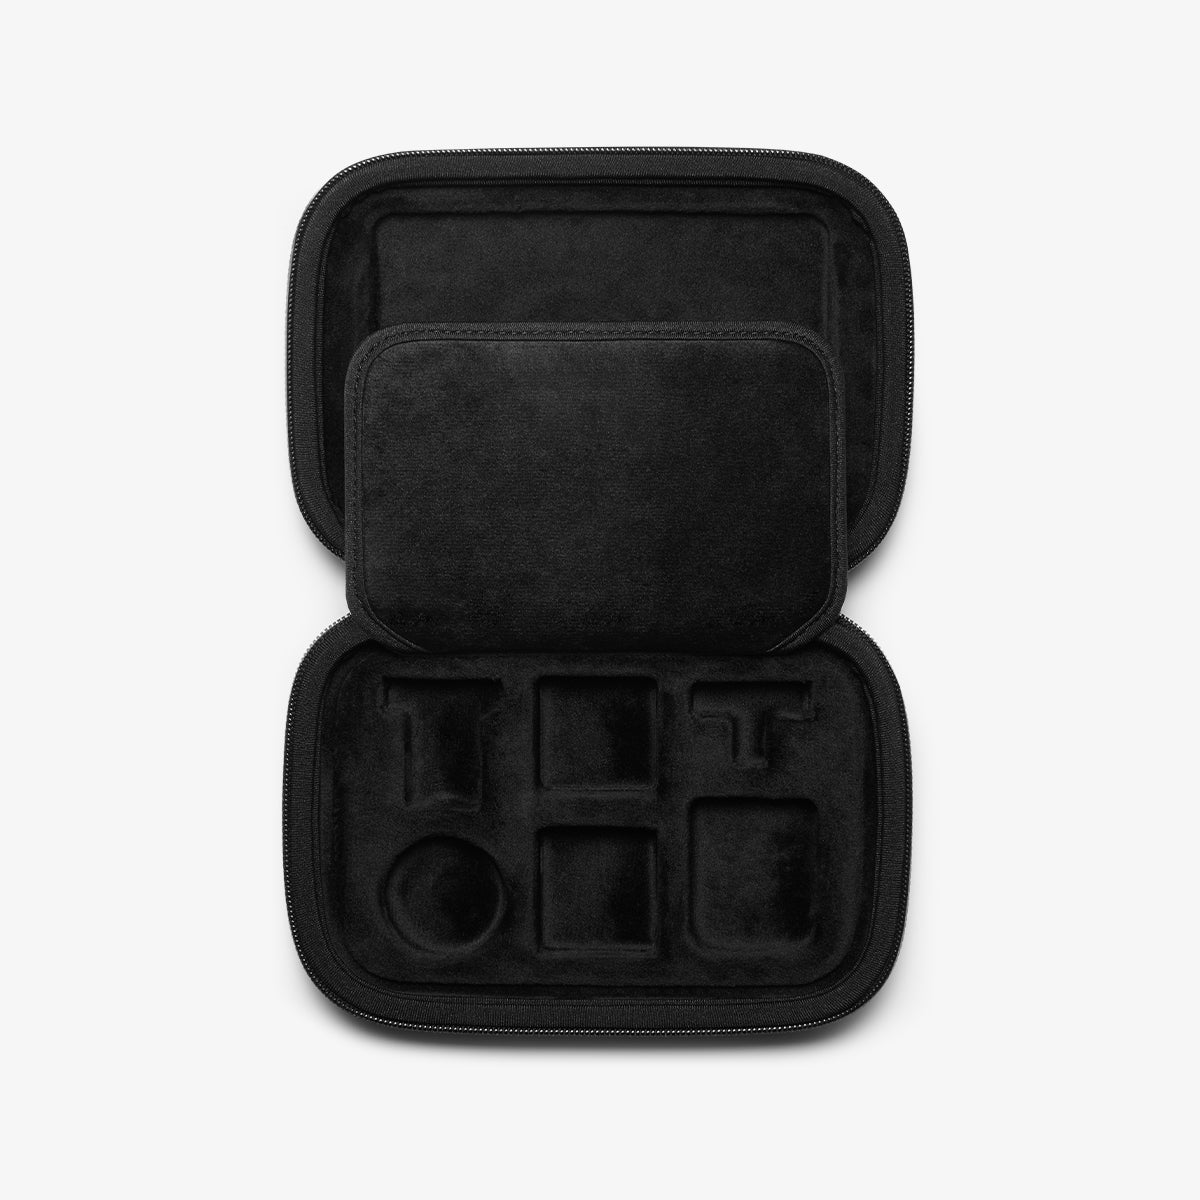 AFA04310 - DJI Action 2 Case Rugged Armor Pro Pouch in black showing the inside with multiple slots to place your DJI securely